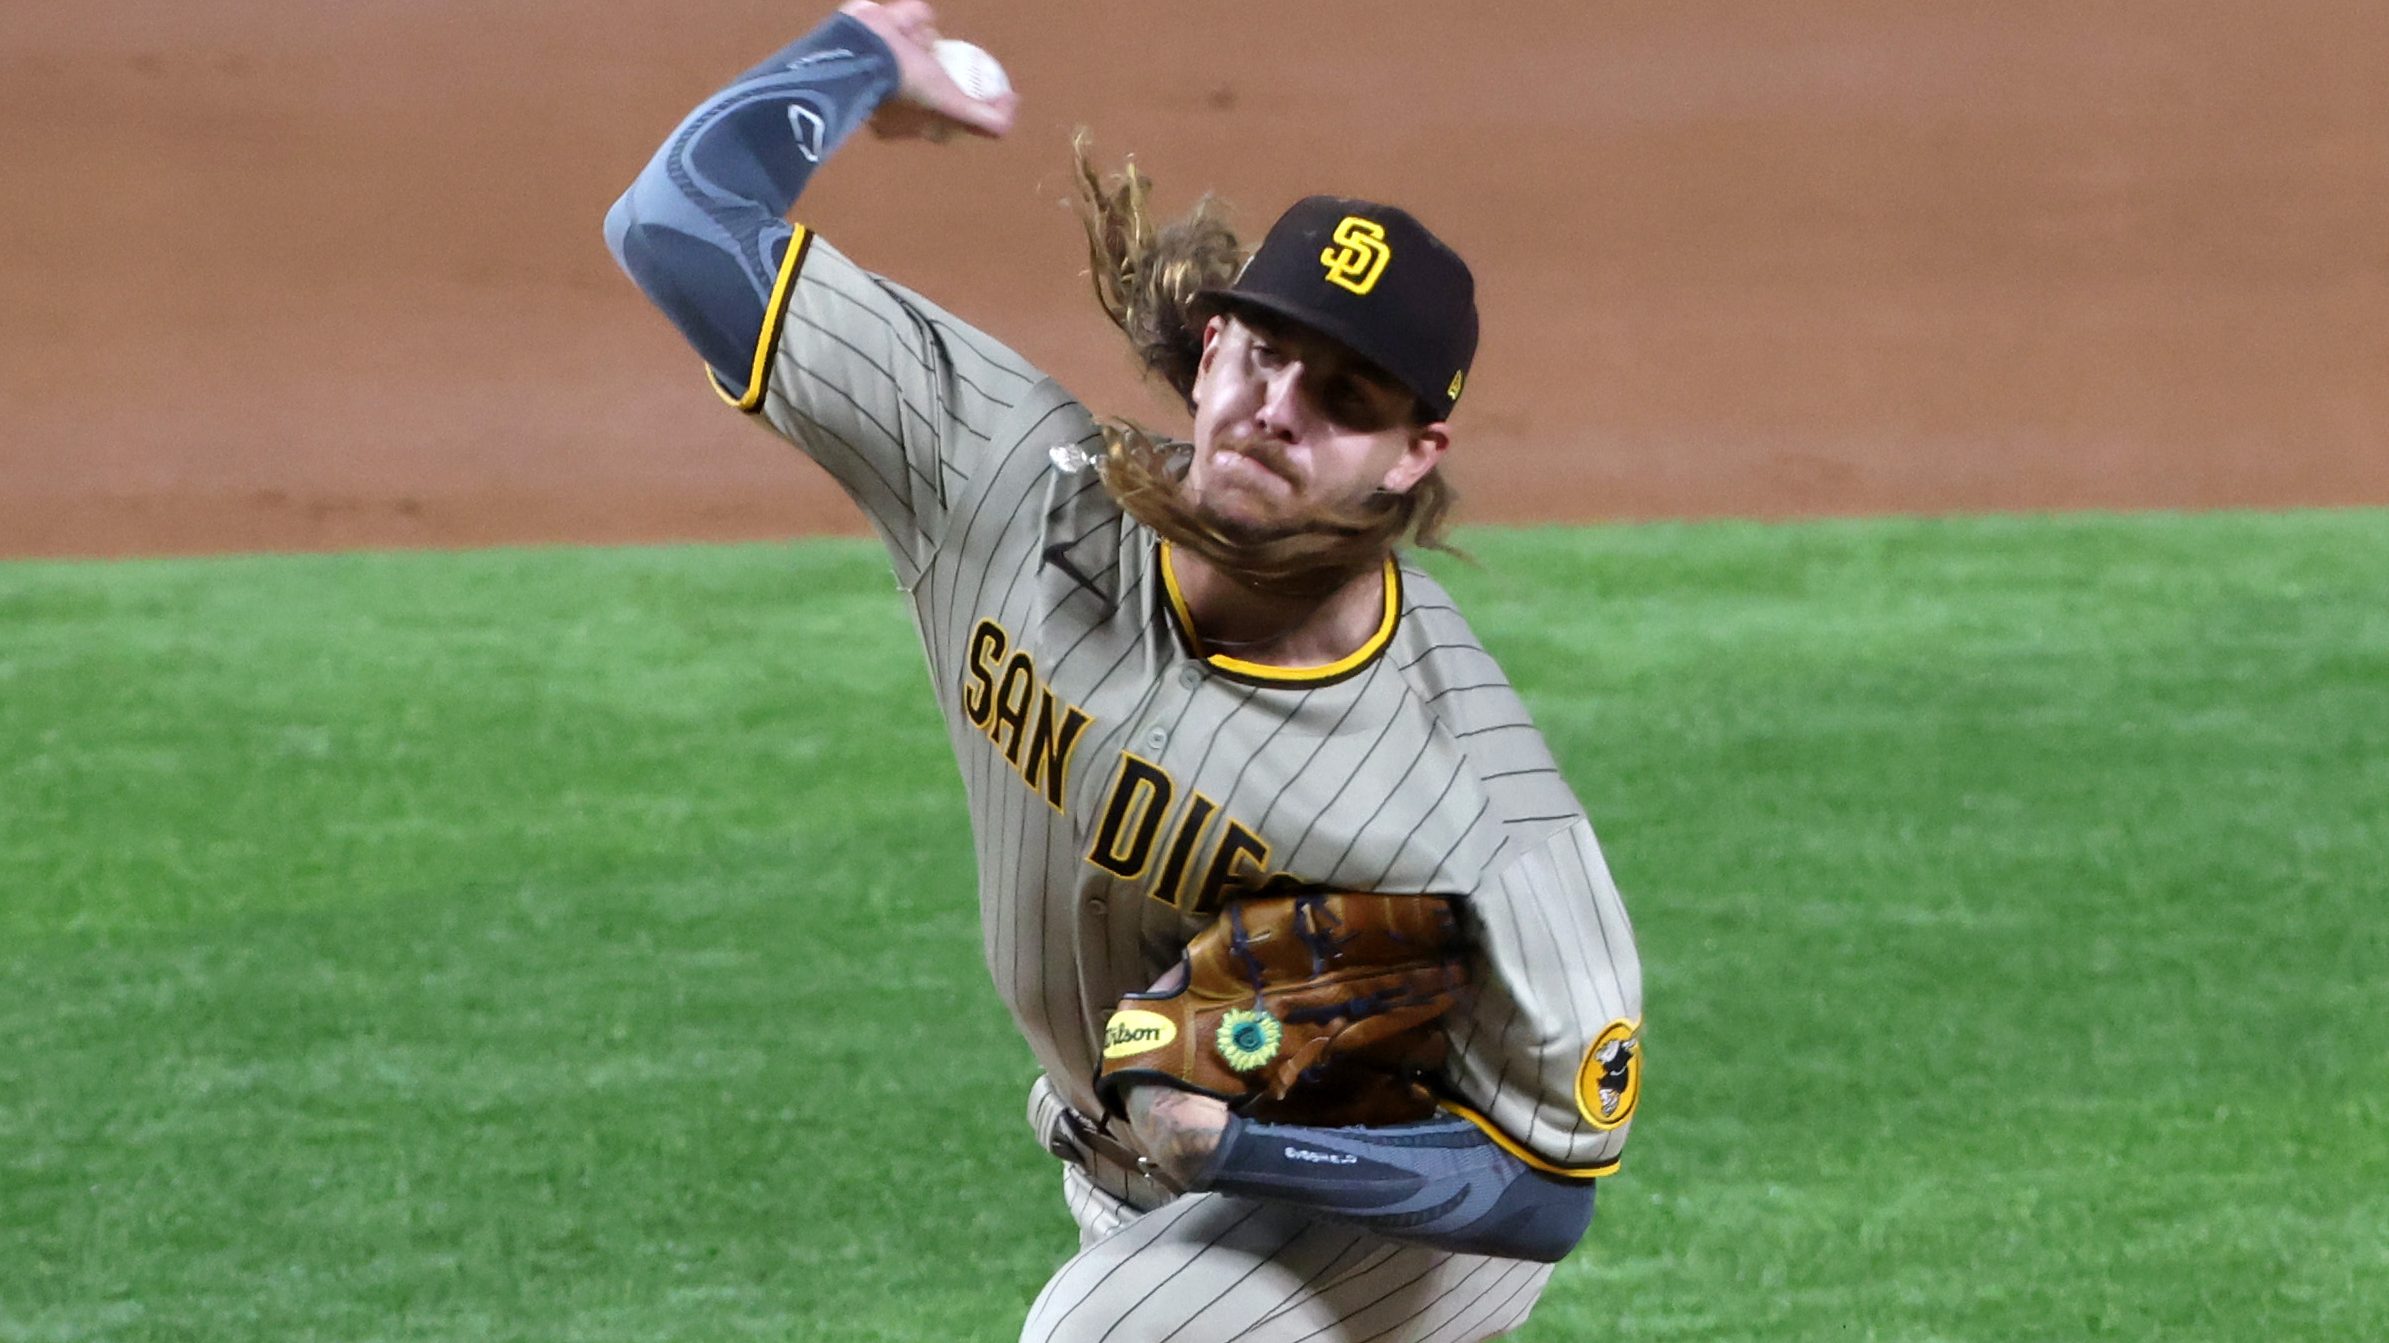 How to watch Padres baseball in 2019 without cable - CNET